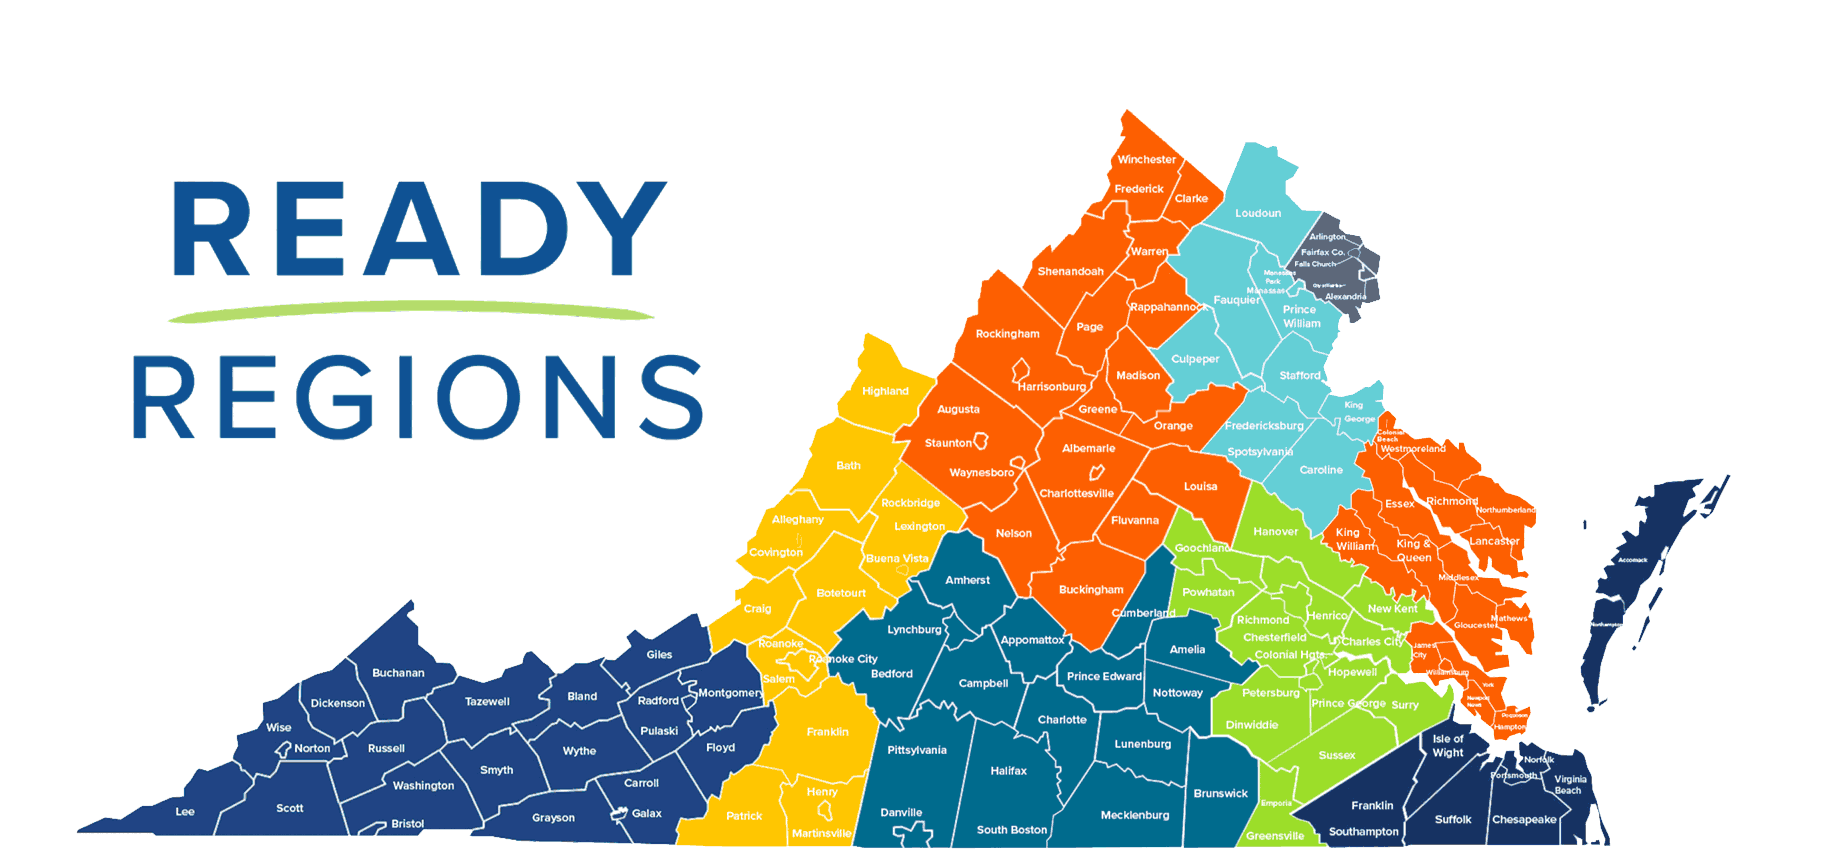 map of virginia highlighted to indicate different ready regions